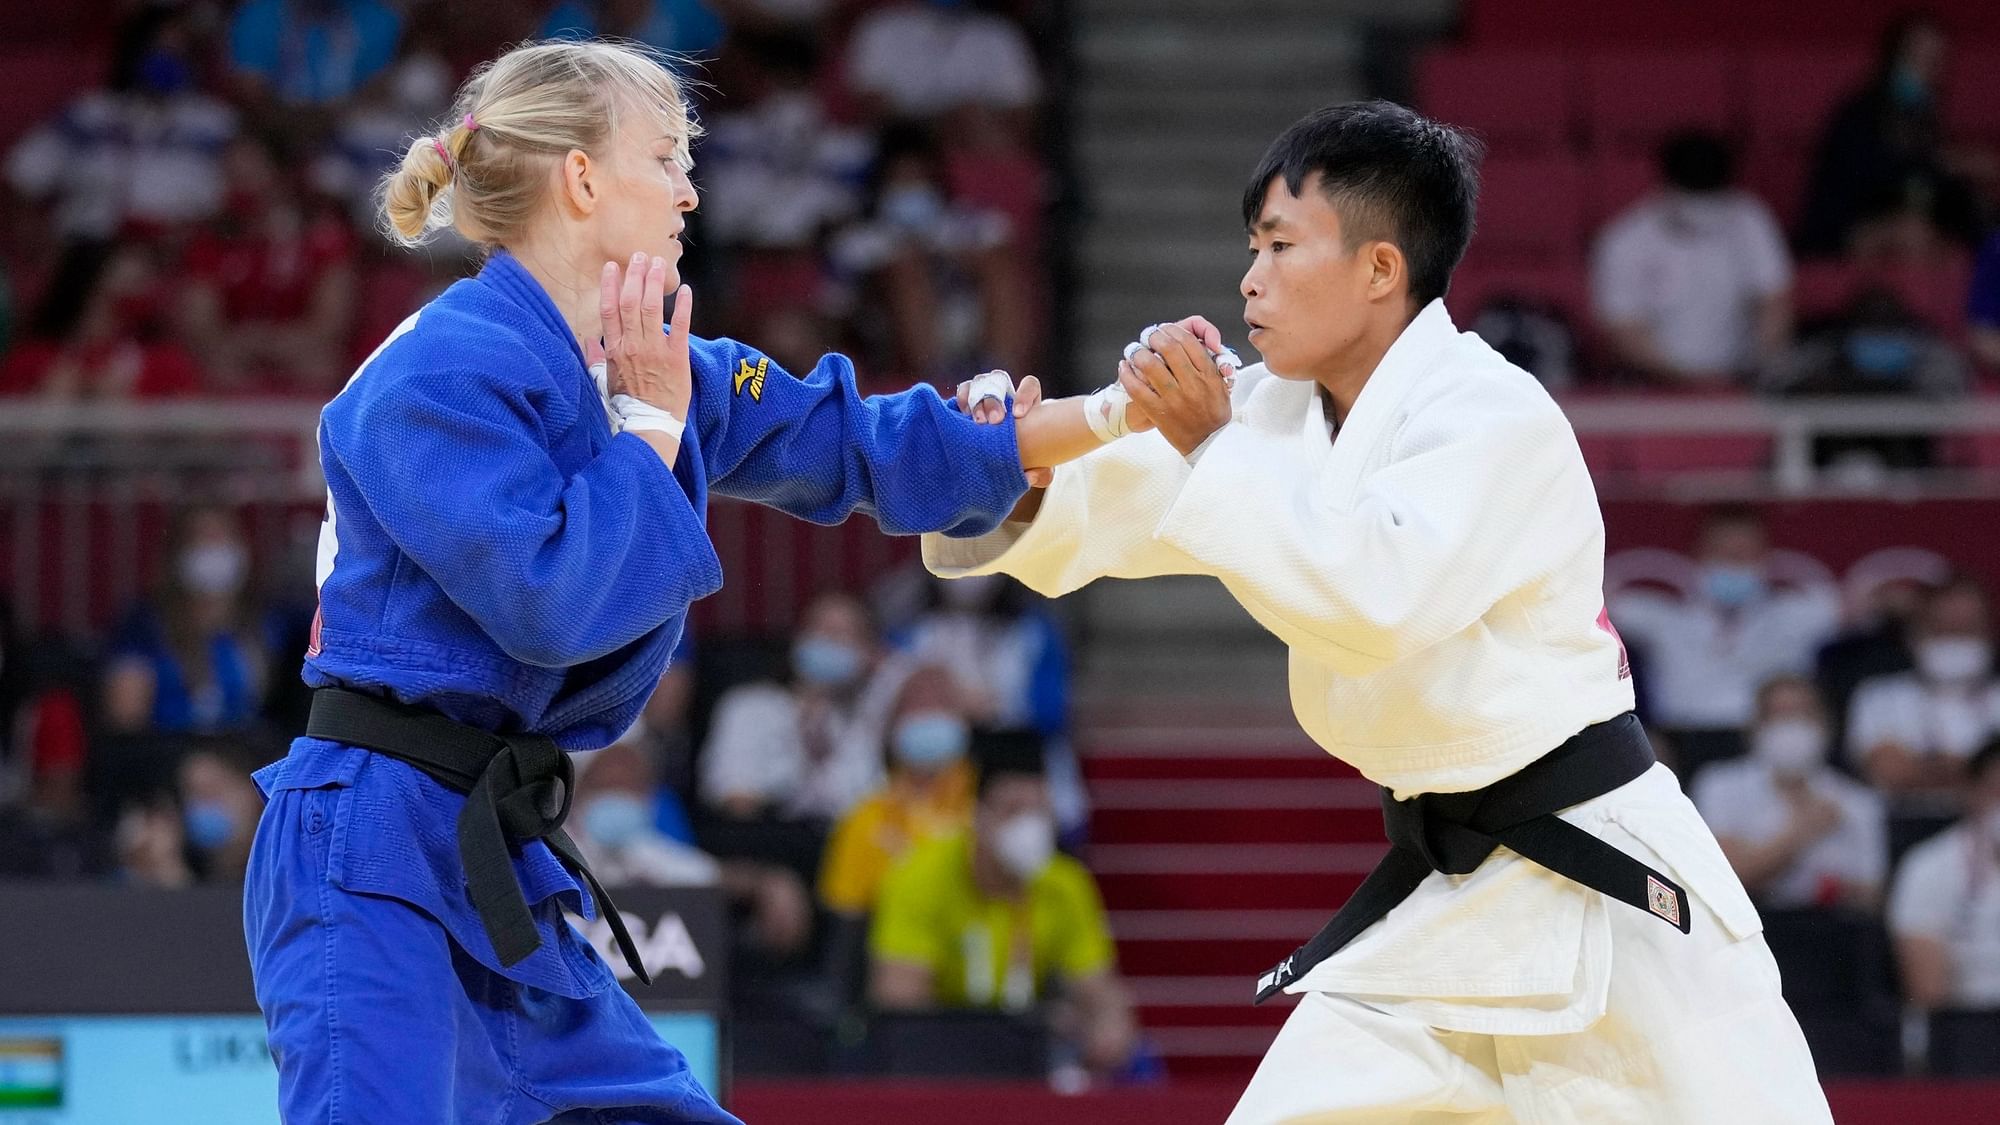 <div class="paragraphs"><p>Shushila Devi Likmabam of India, right, and Eva Csernoviczki of Hungary compete during their womens -48kg round of 32 judo match at the 2020 Summer Olympics, Saturday, July 24, 2021, in Tokyo, Japan.<br></p></div>